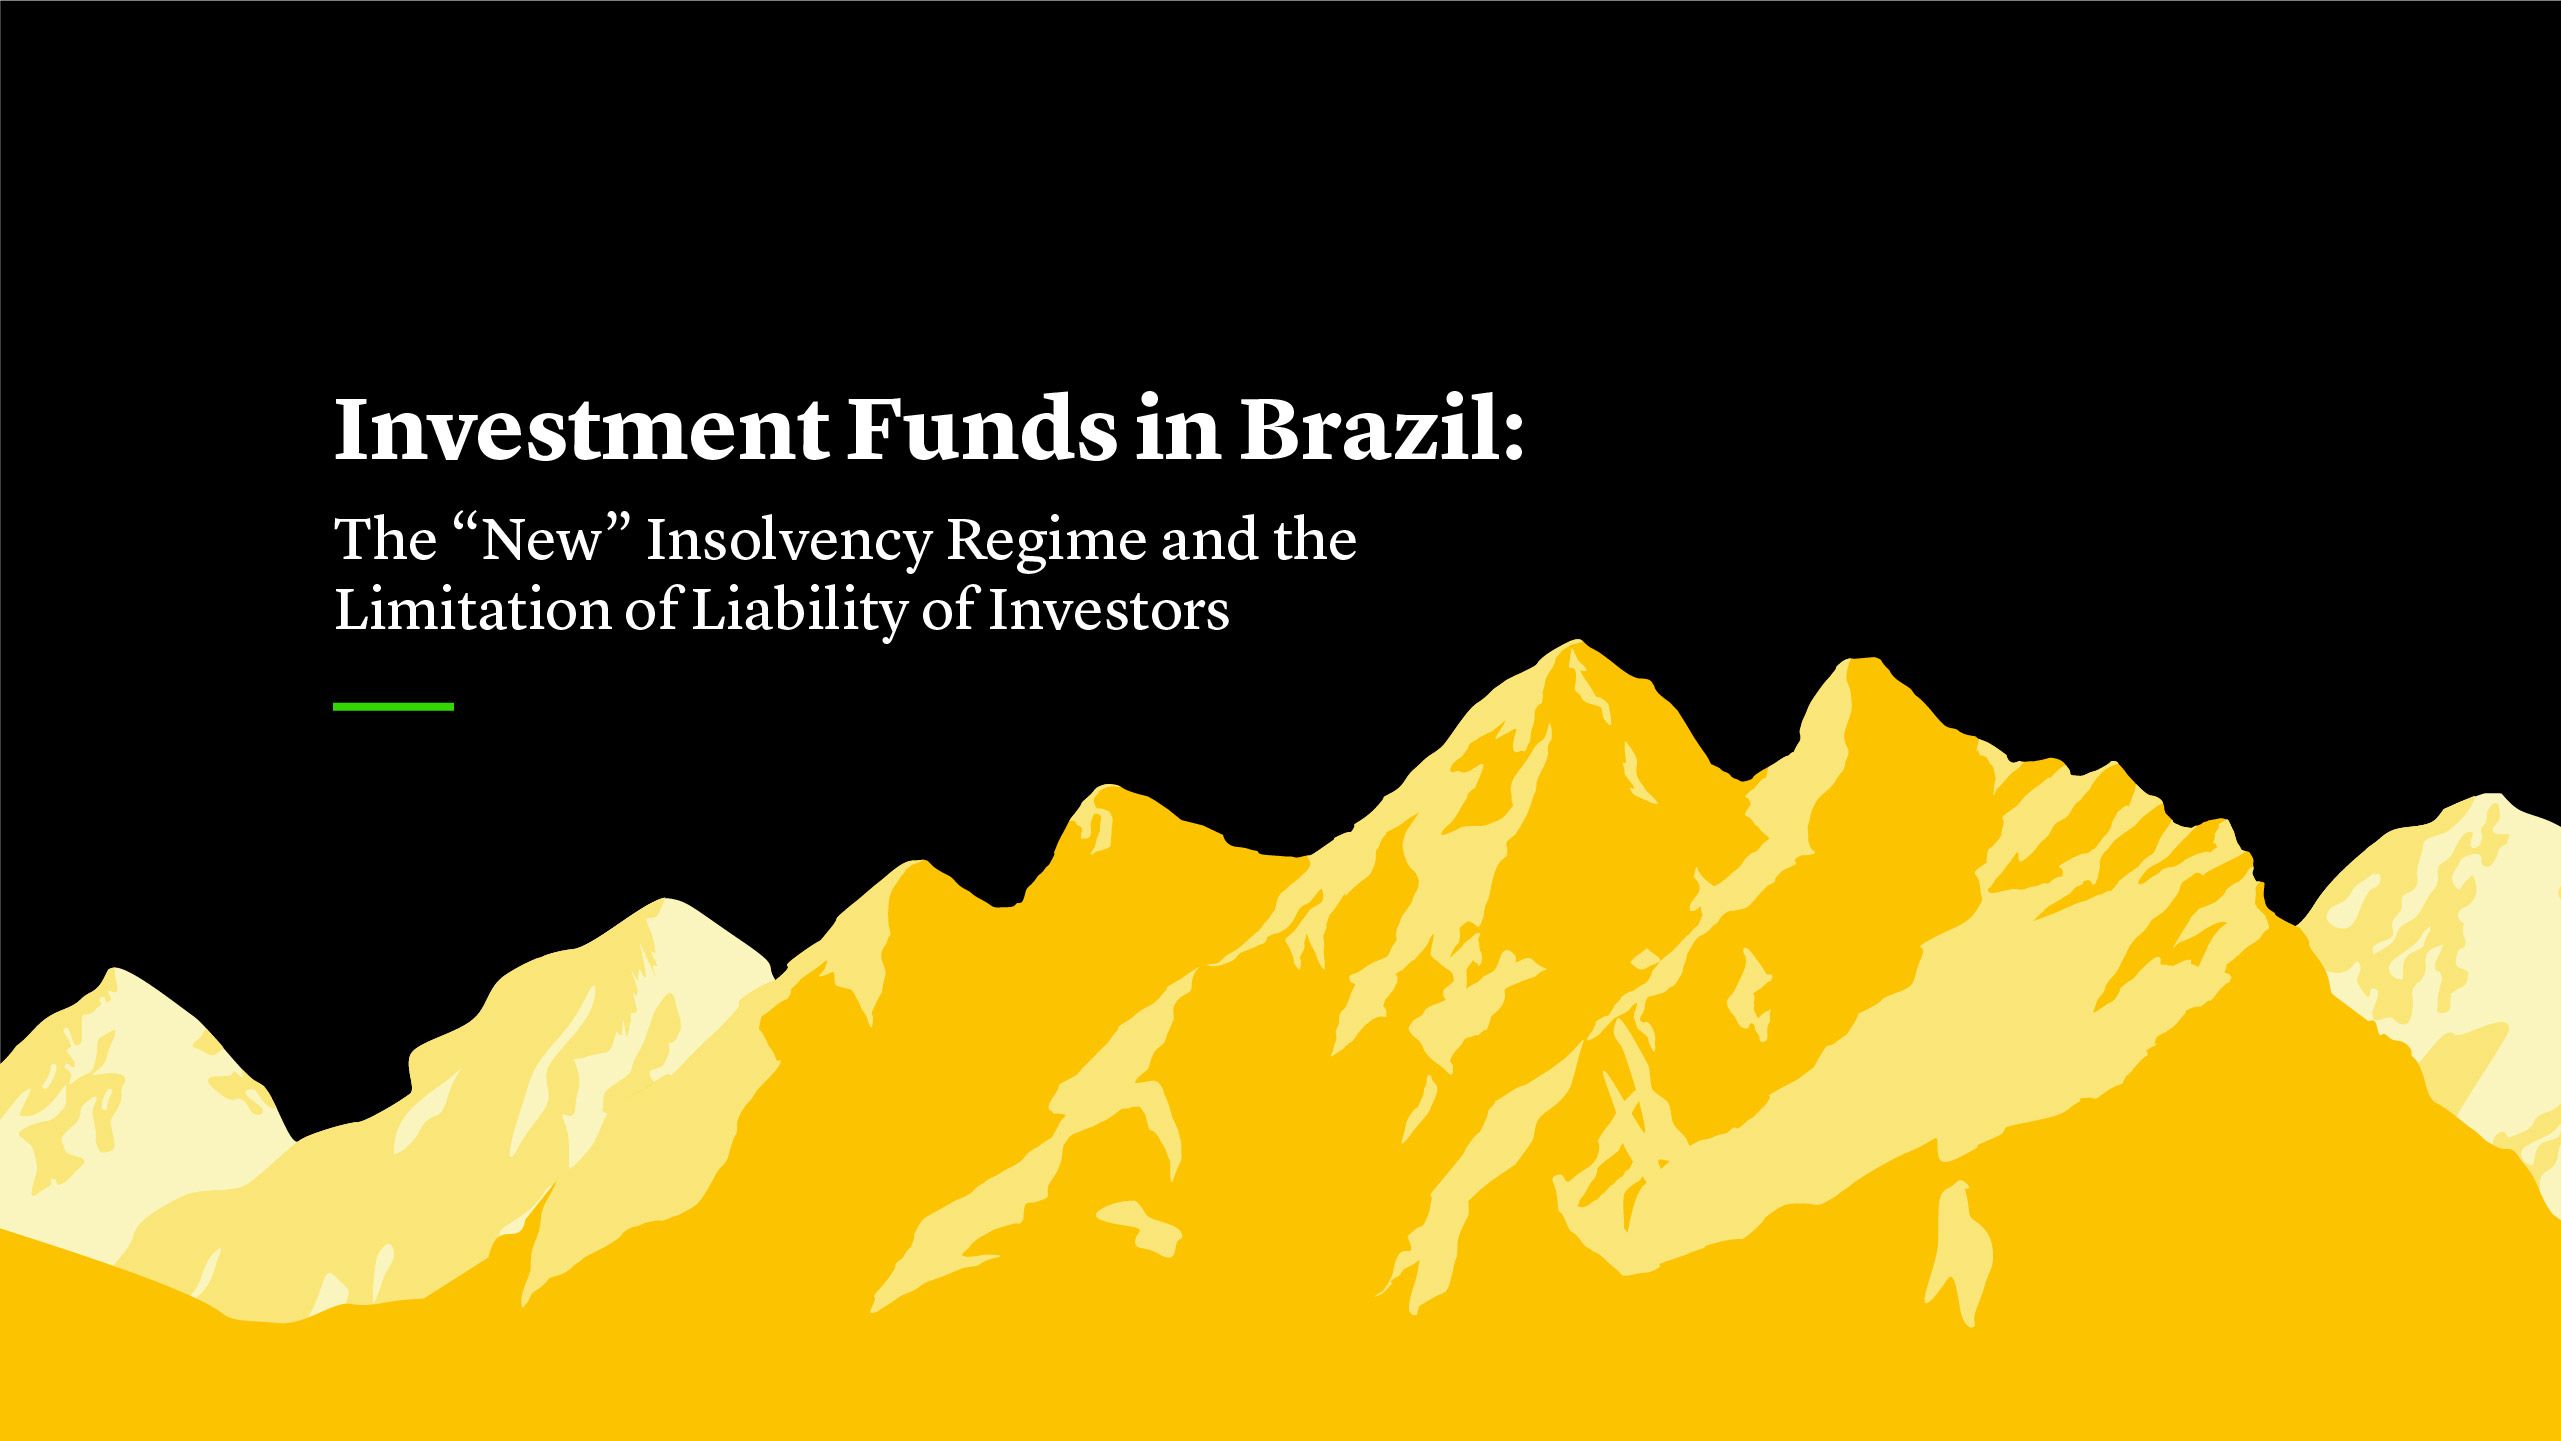 Investment Funds in Brazil: The “New” Insolvency Regime and the Limitation of Liability of Investors 